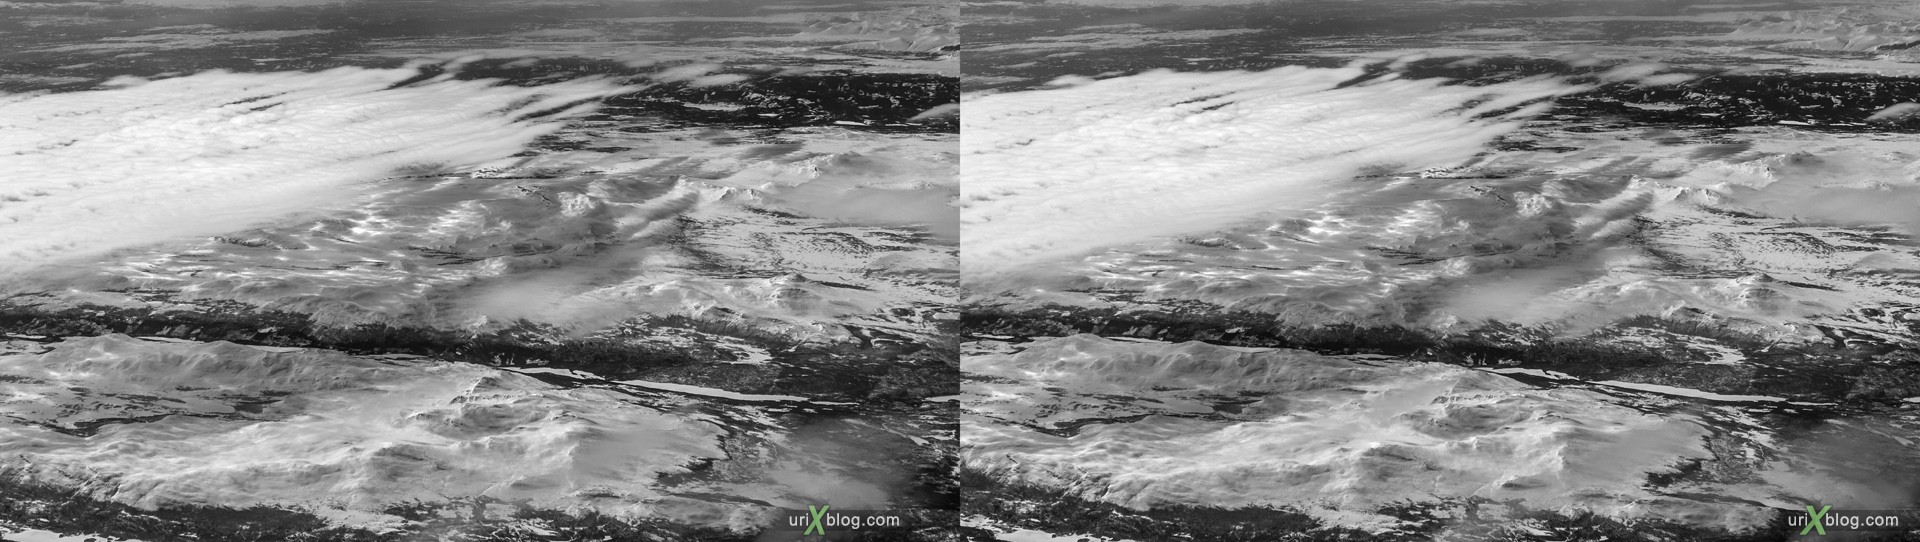 2013, Norway, mountains, panorama, airplane, black and white, bw, snow, ice, clouds, horizon, 3D, stereo pair, cross-eyed, crossview, cross view stereo pair, stereoscopic